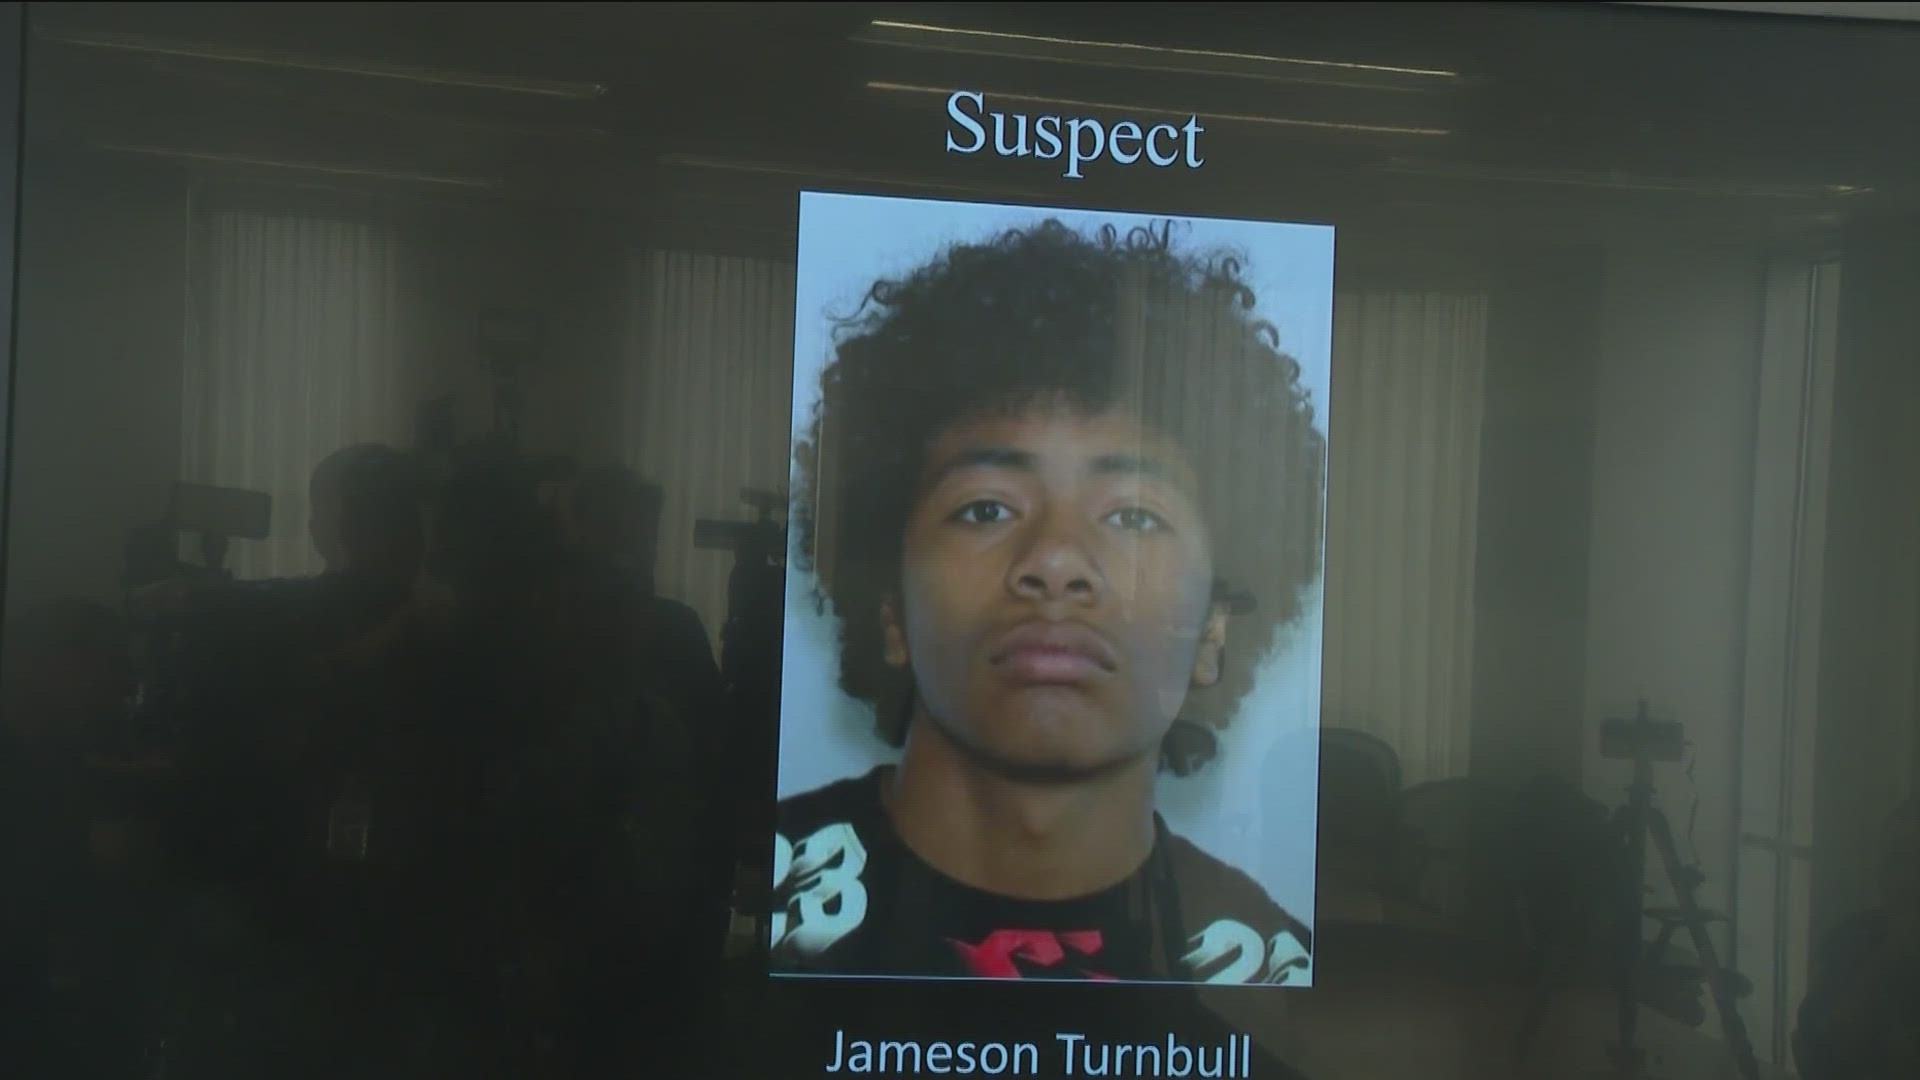 Jameson Turnbull, a robbery suspect, was shot and killed by police last Friday.